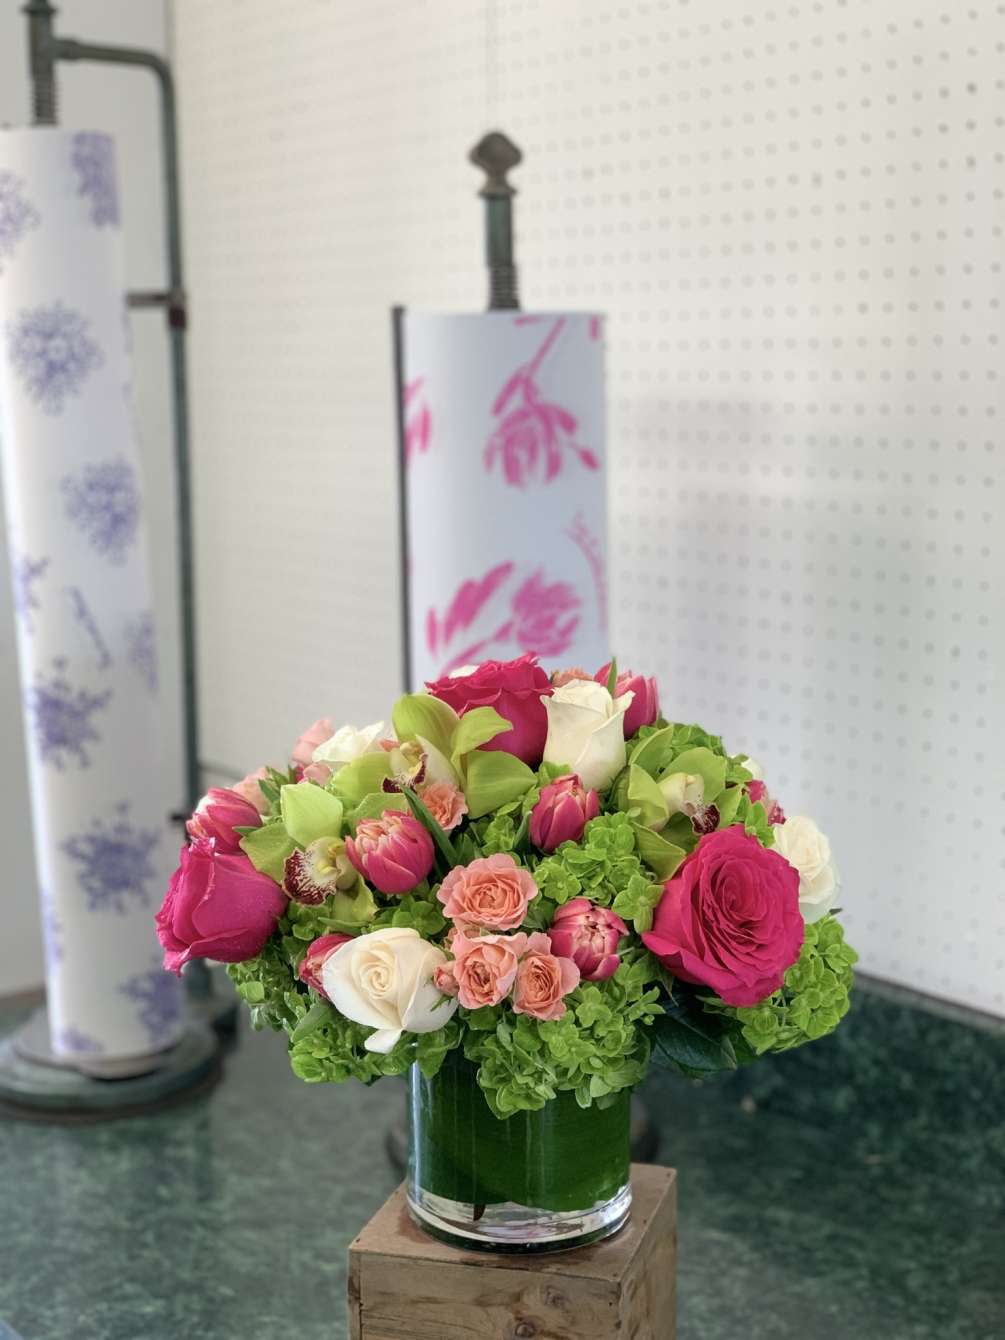 A lush arrangement featuring hydrangea, roses, Dutch tulips, &amp; orchids. This is